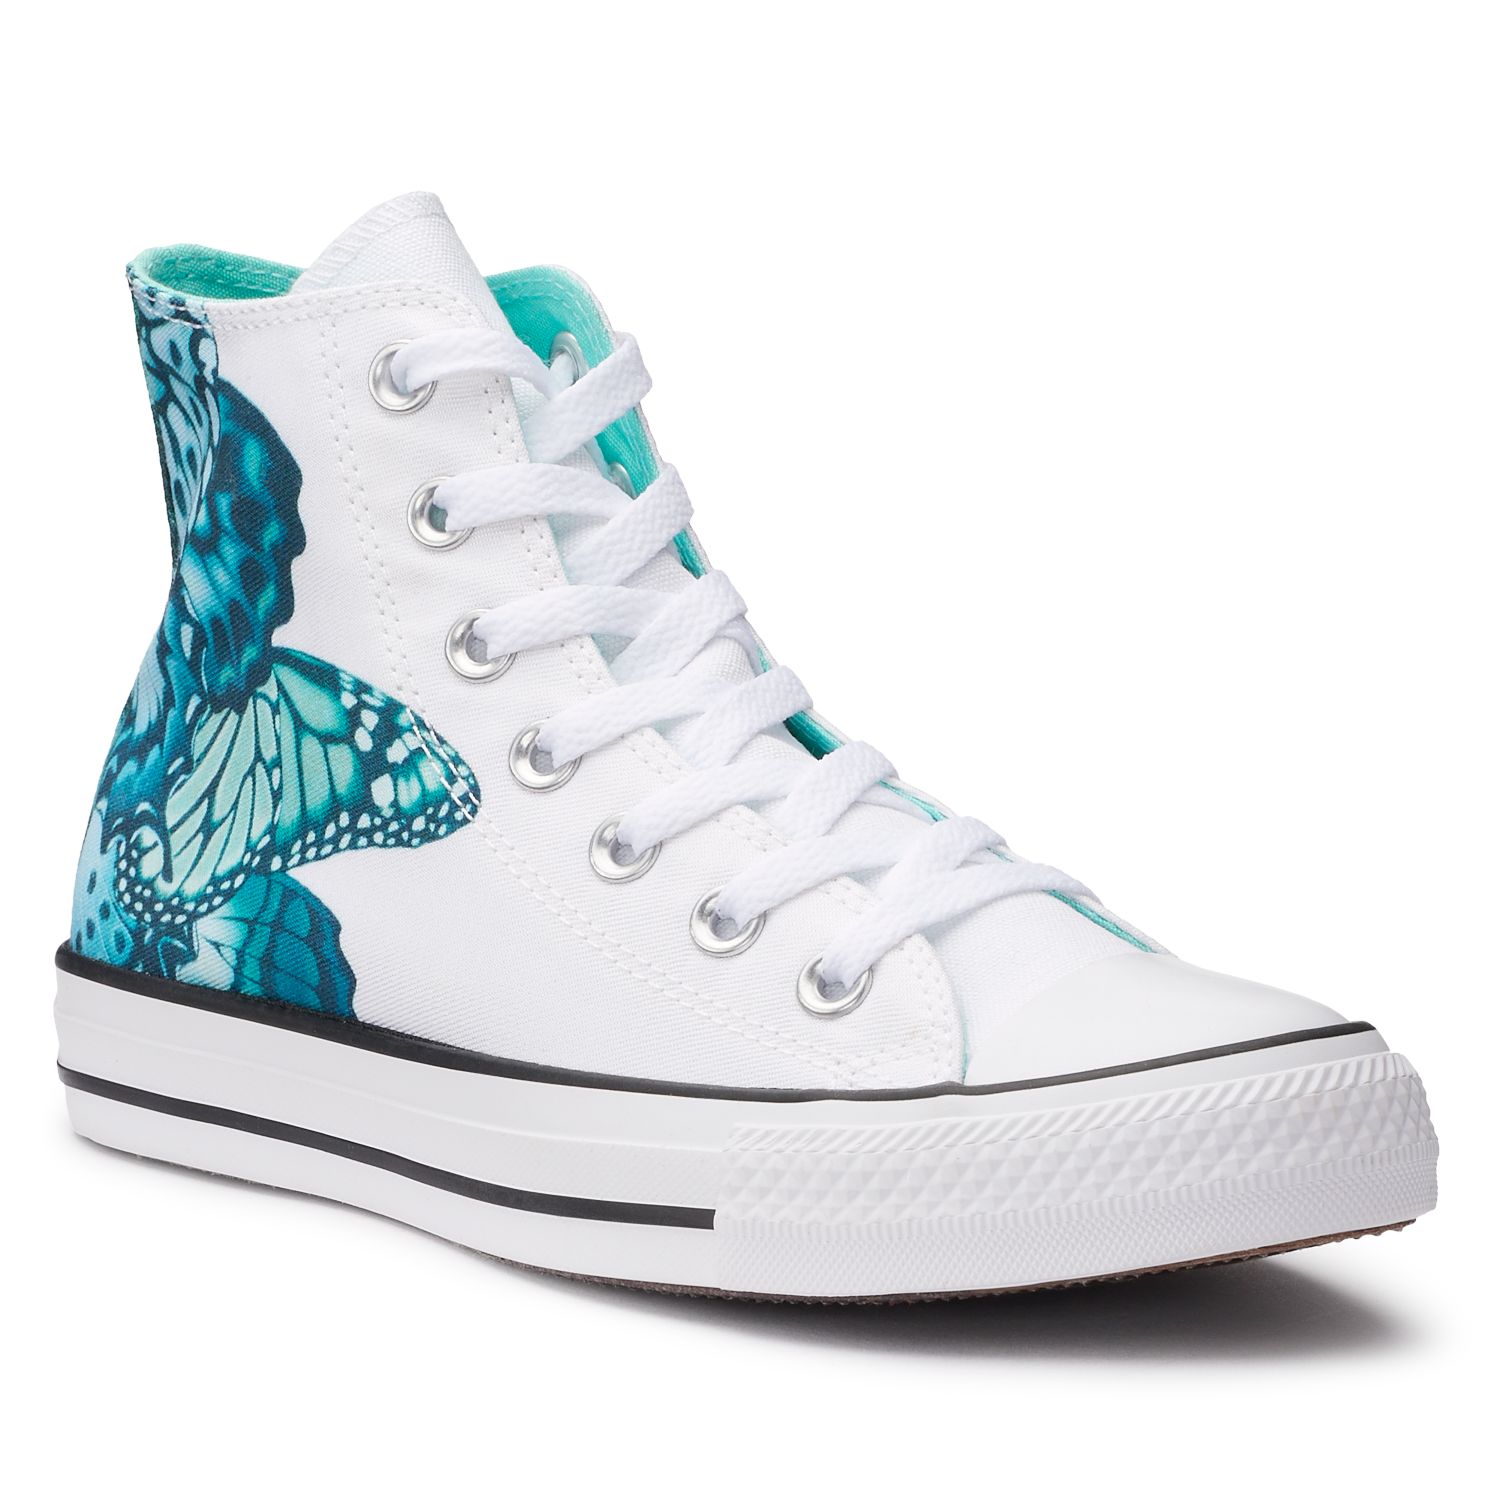 butterfly converse high tops Off 58% 